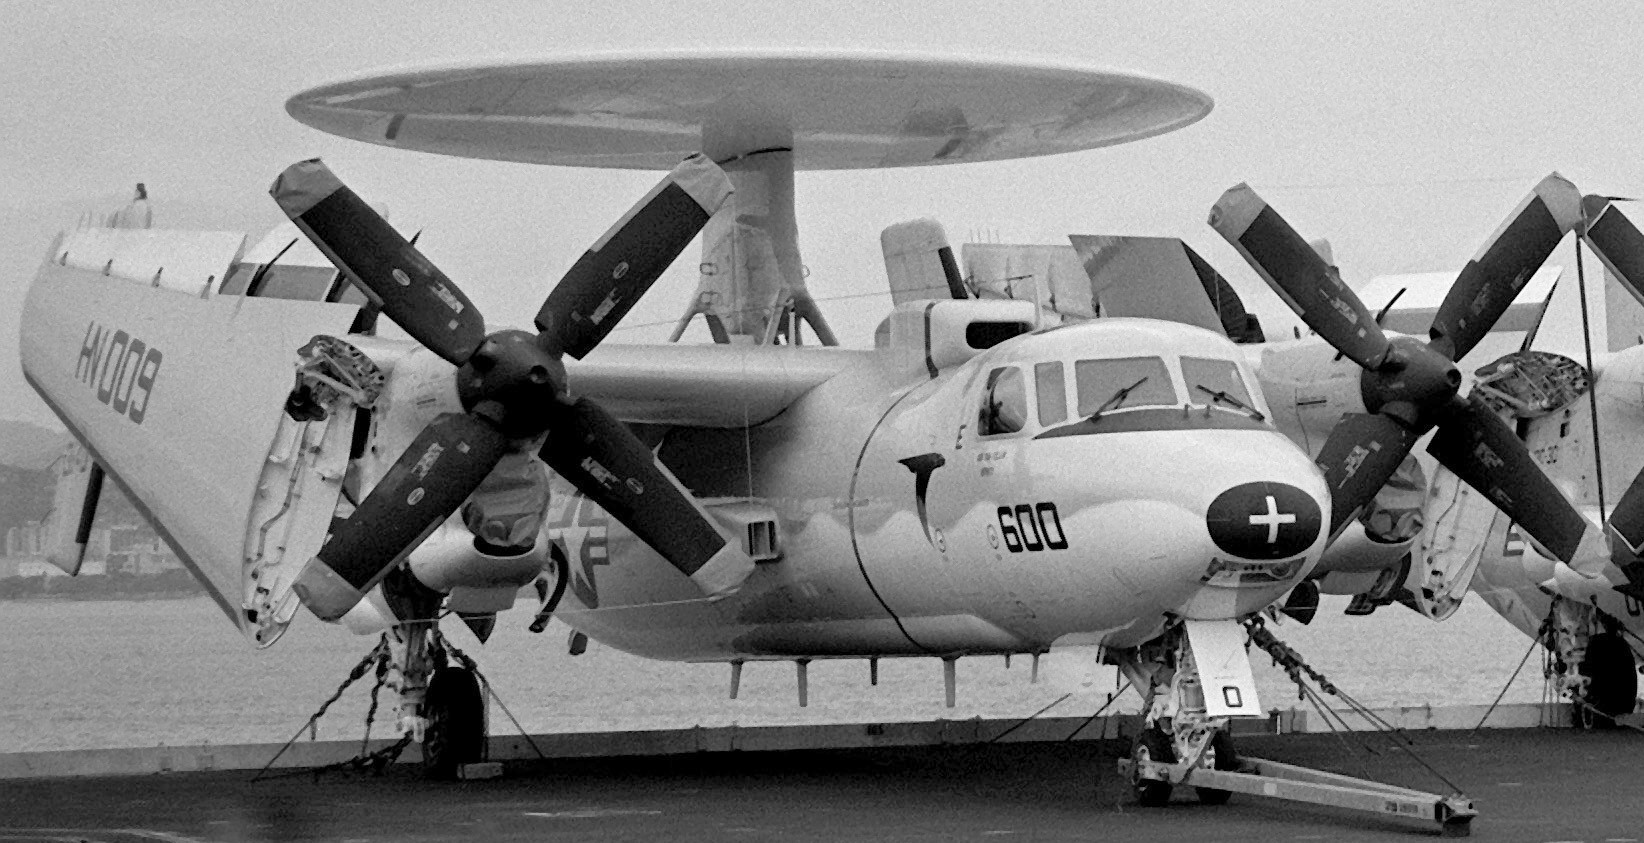 vaw-117 wallbangers carrier airborne early warning squadron navy e-2c hawkeye cvw-11 uss abraham lincoln cvn-72 91